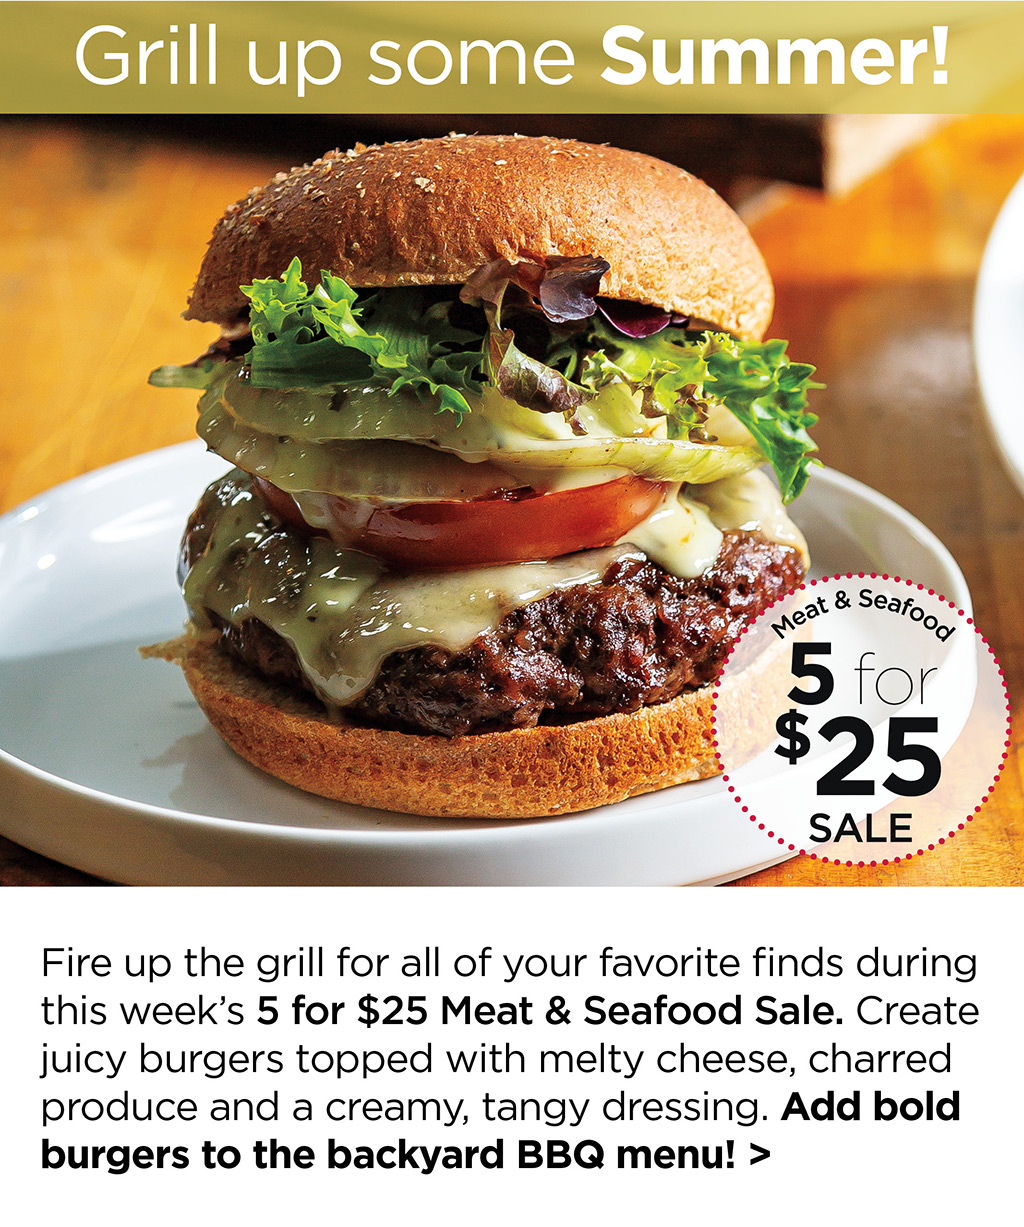 Grill up some Summer! Fire up the grill for all of your favorite finds during this week's 5 for $25 Meat & Seafood Sale. Create juicy burgers topped with melty cheese, charred produce and a creamy, tangy dressing. Add bold burgers to the backyard BBQ menu! >